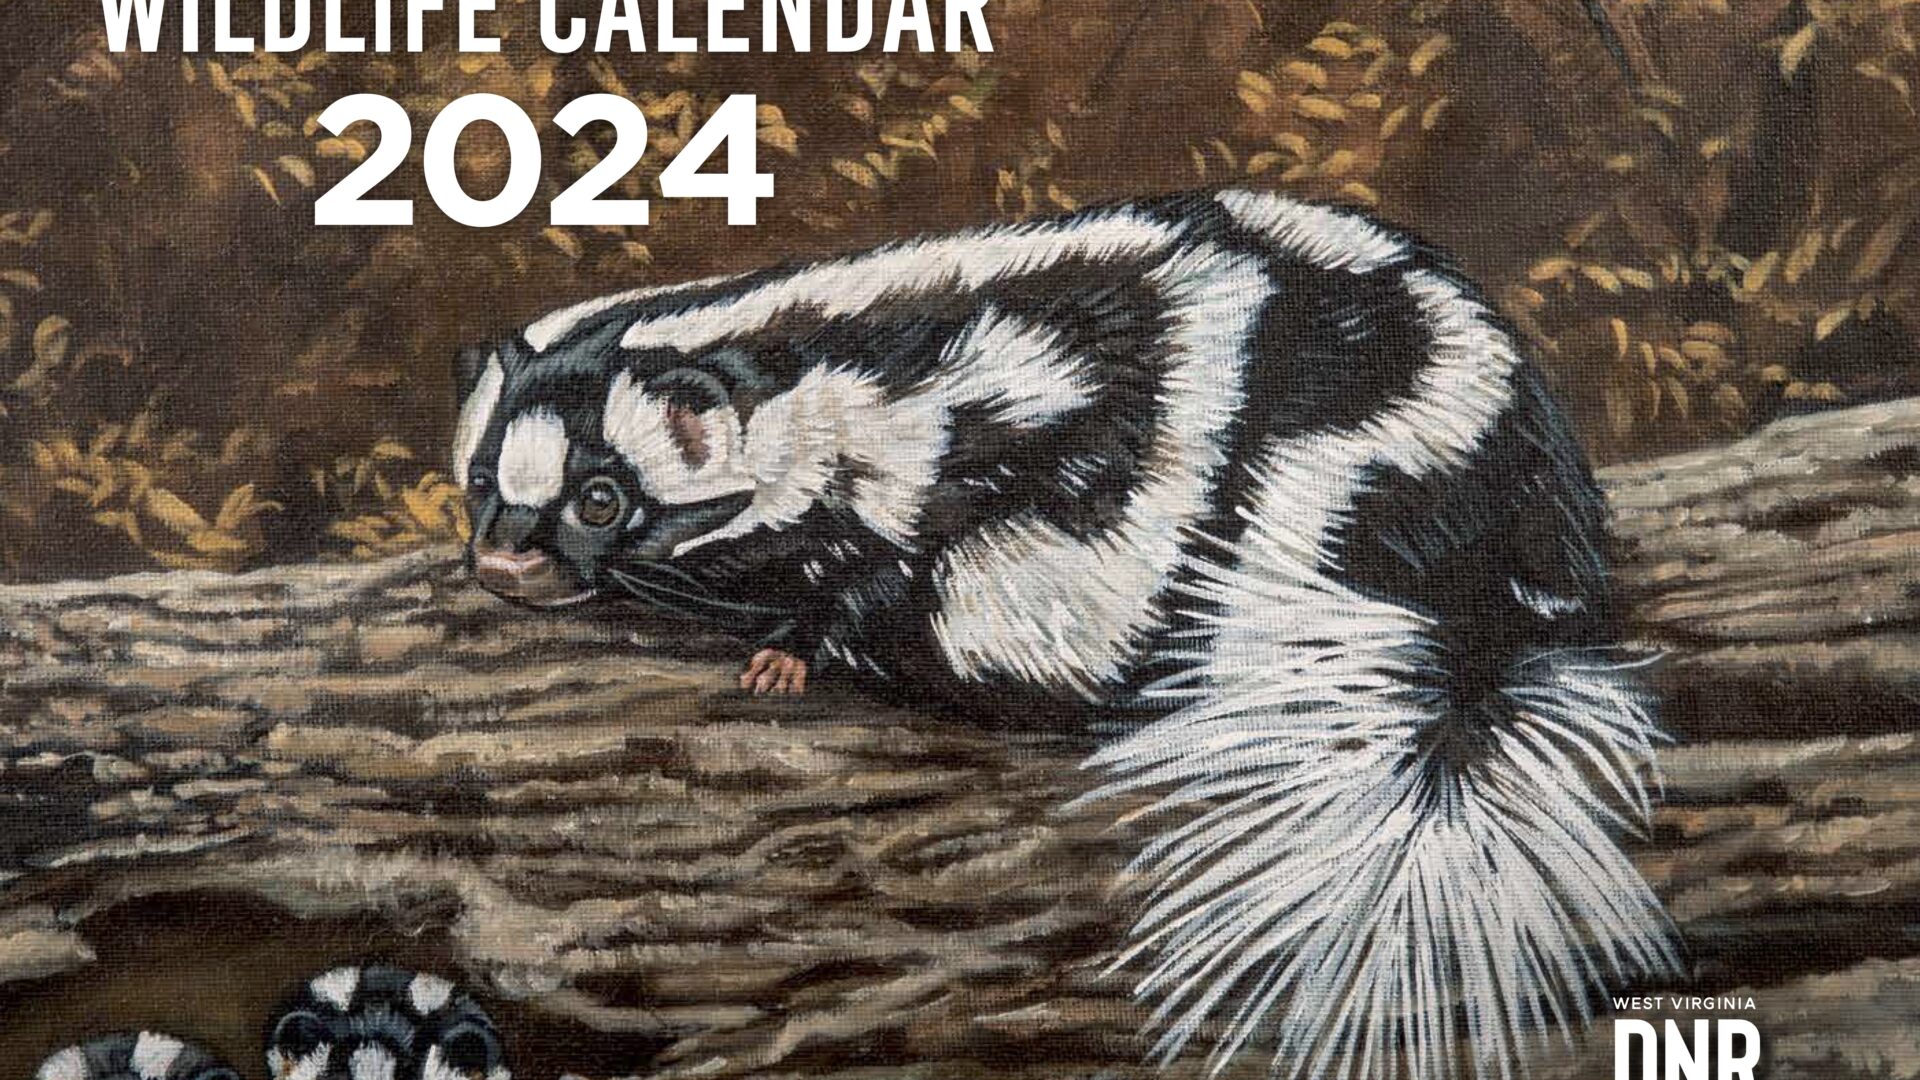 2024 West Virginia Wildlife Calendar now available to purchase - WVDNR